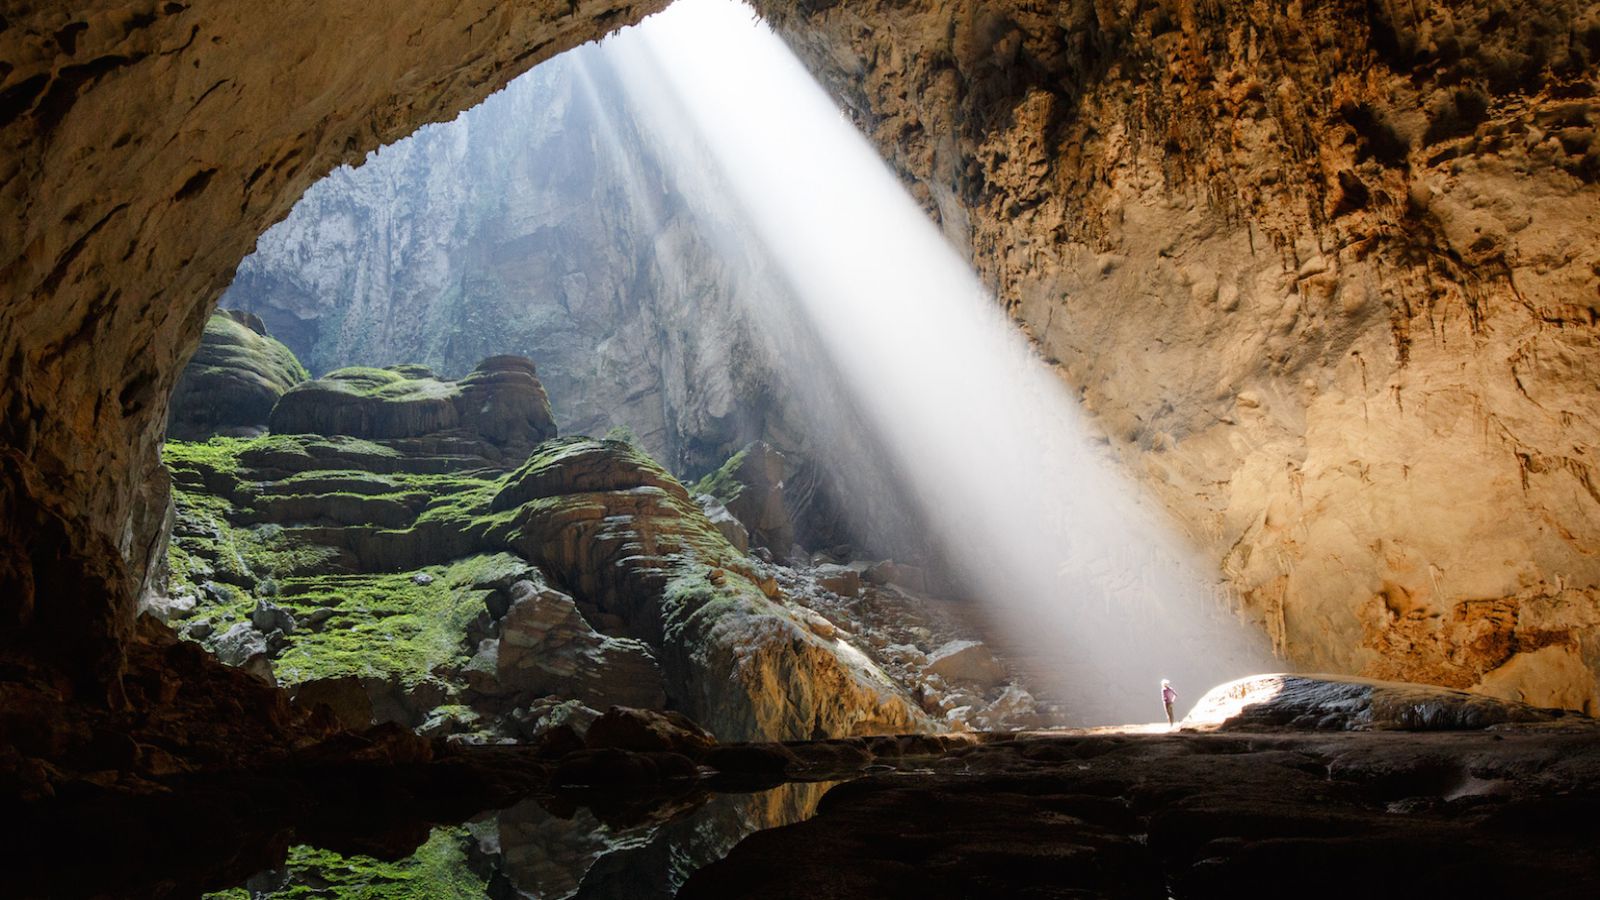 Vietnam’s Son Doong Cave, already world’s largest, may be bigger than thought